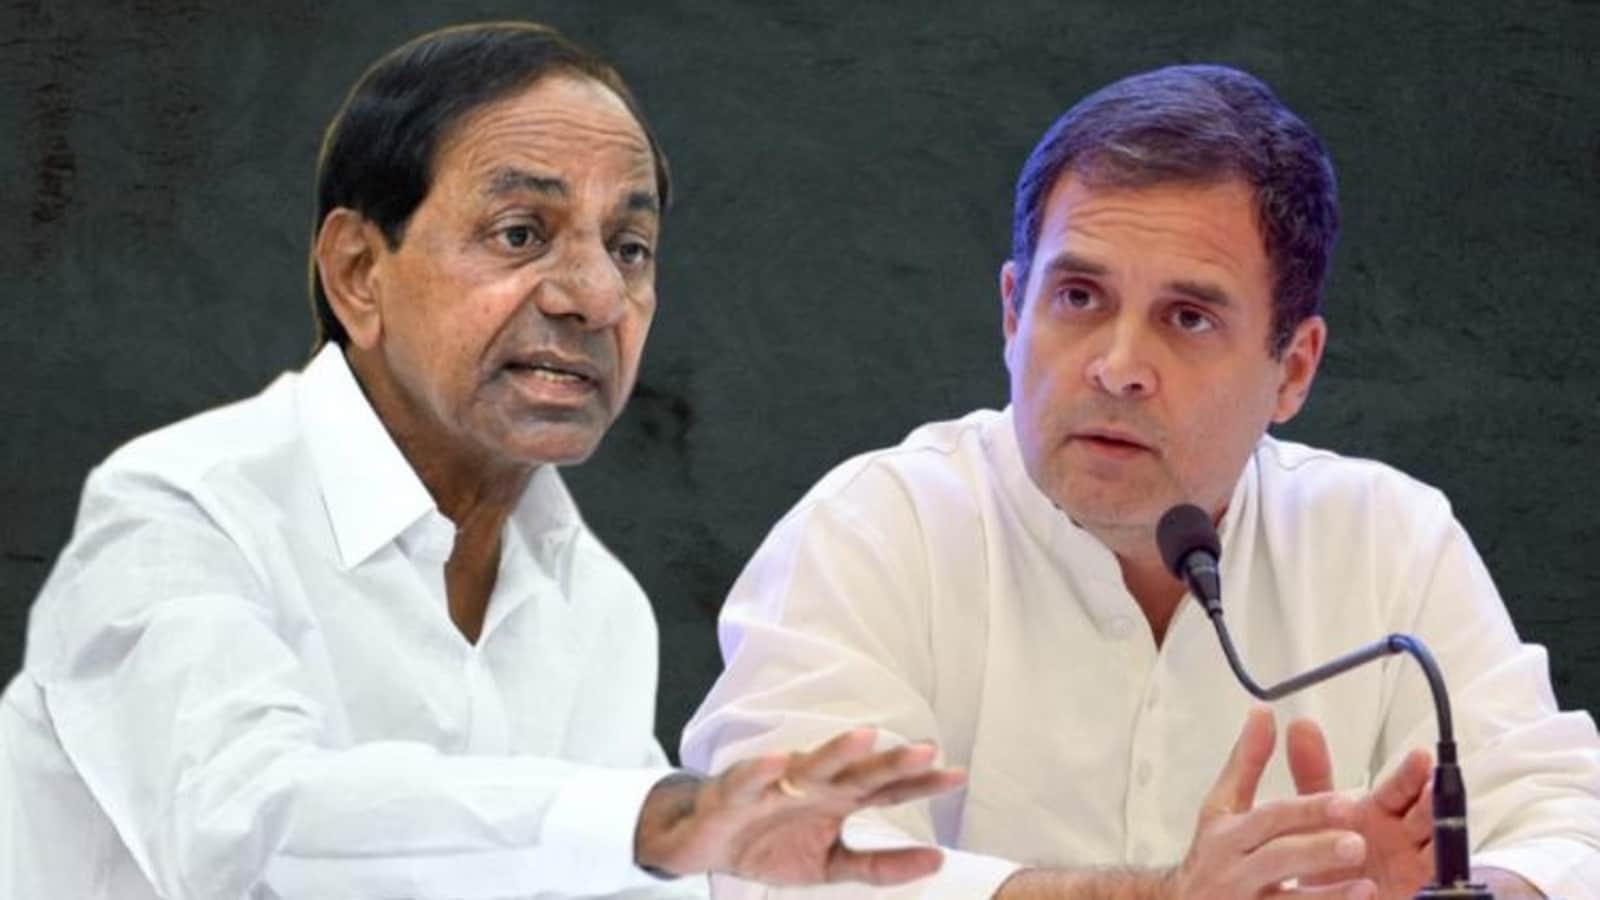 The school where KCR studied was built by Congress: Rahul